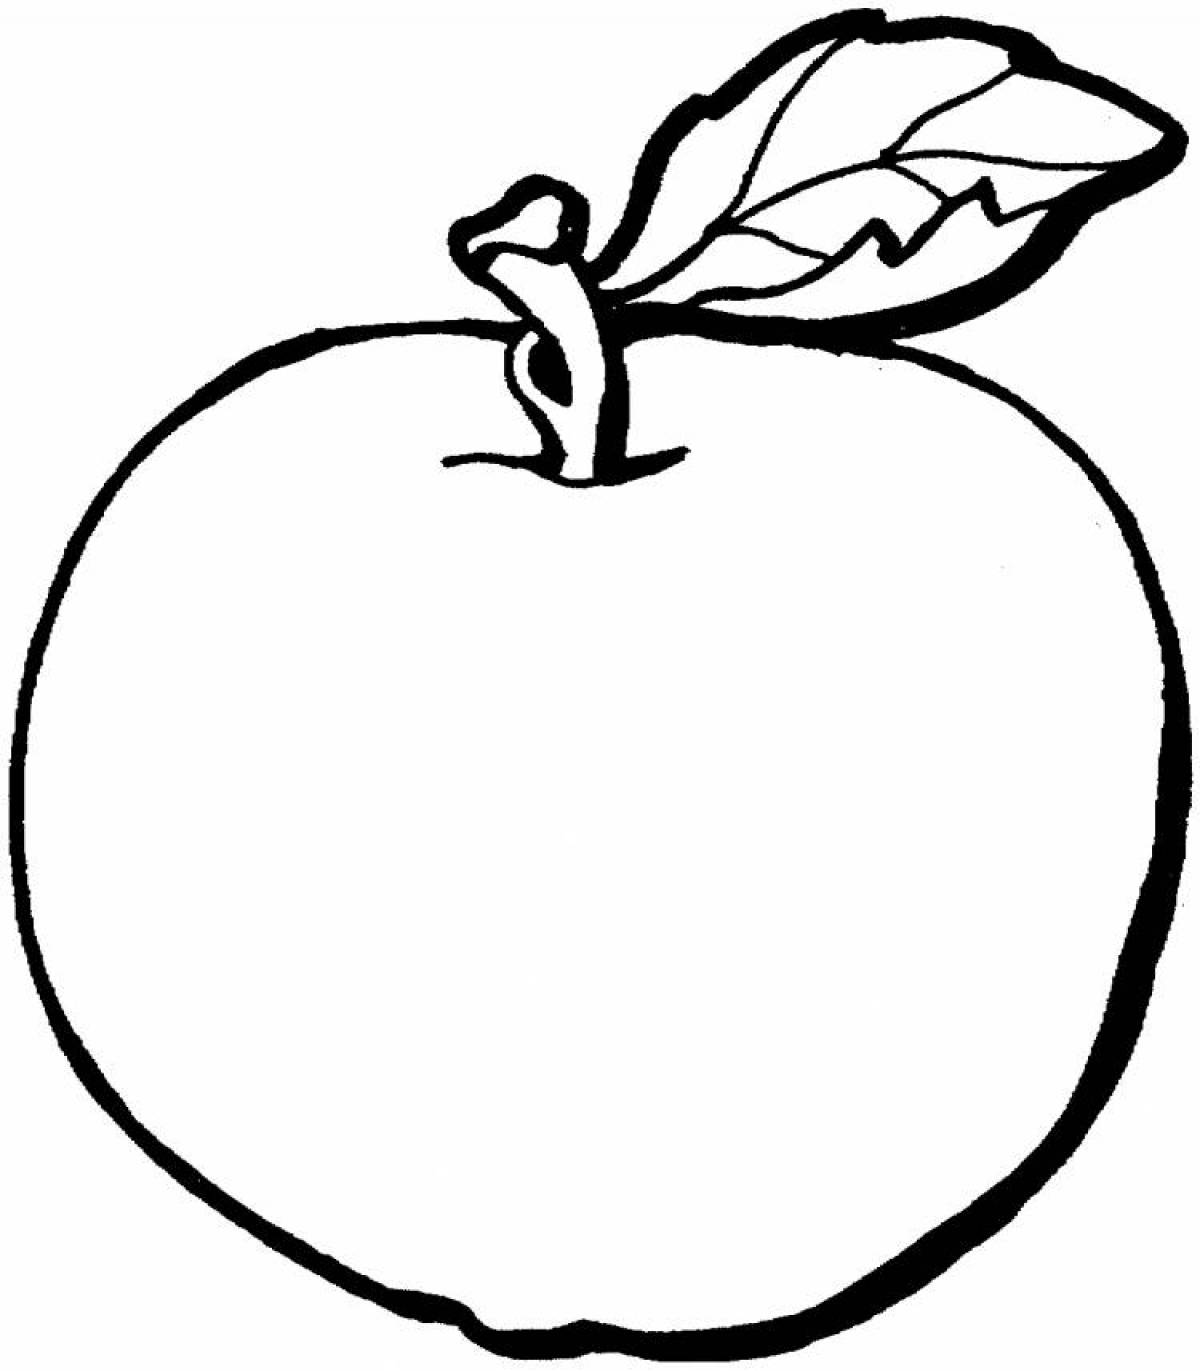 Exciting apple coloring book for kids